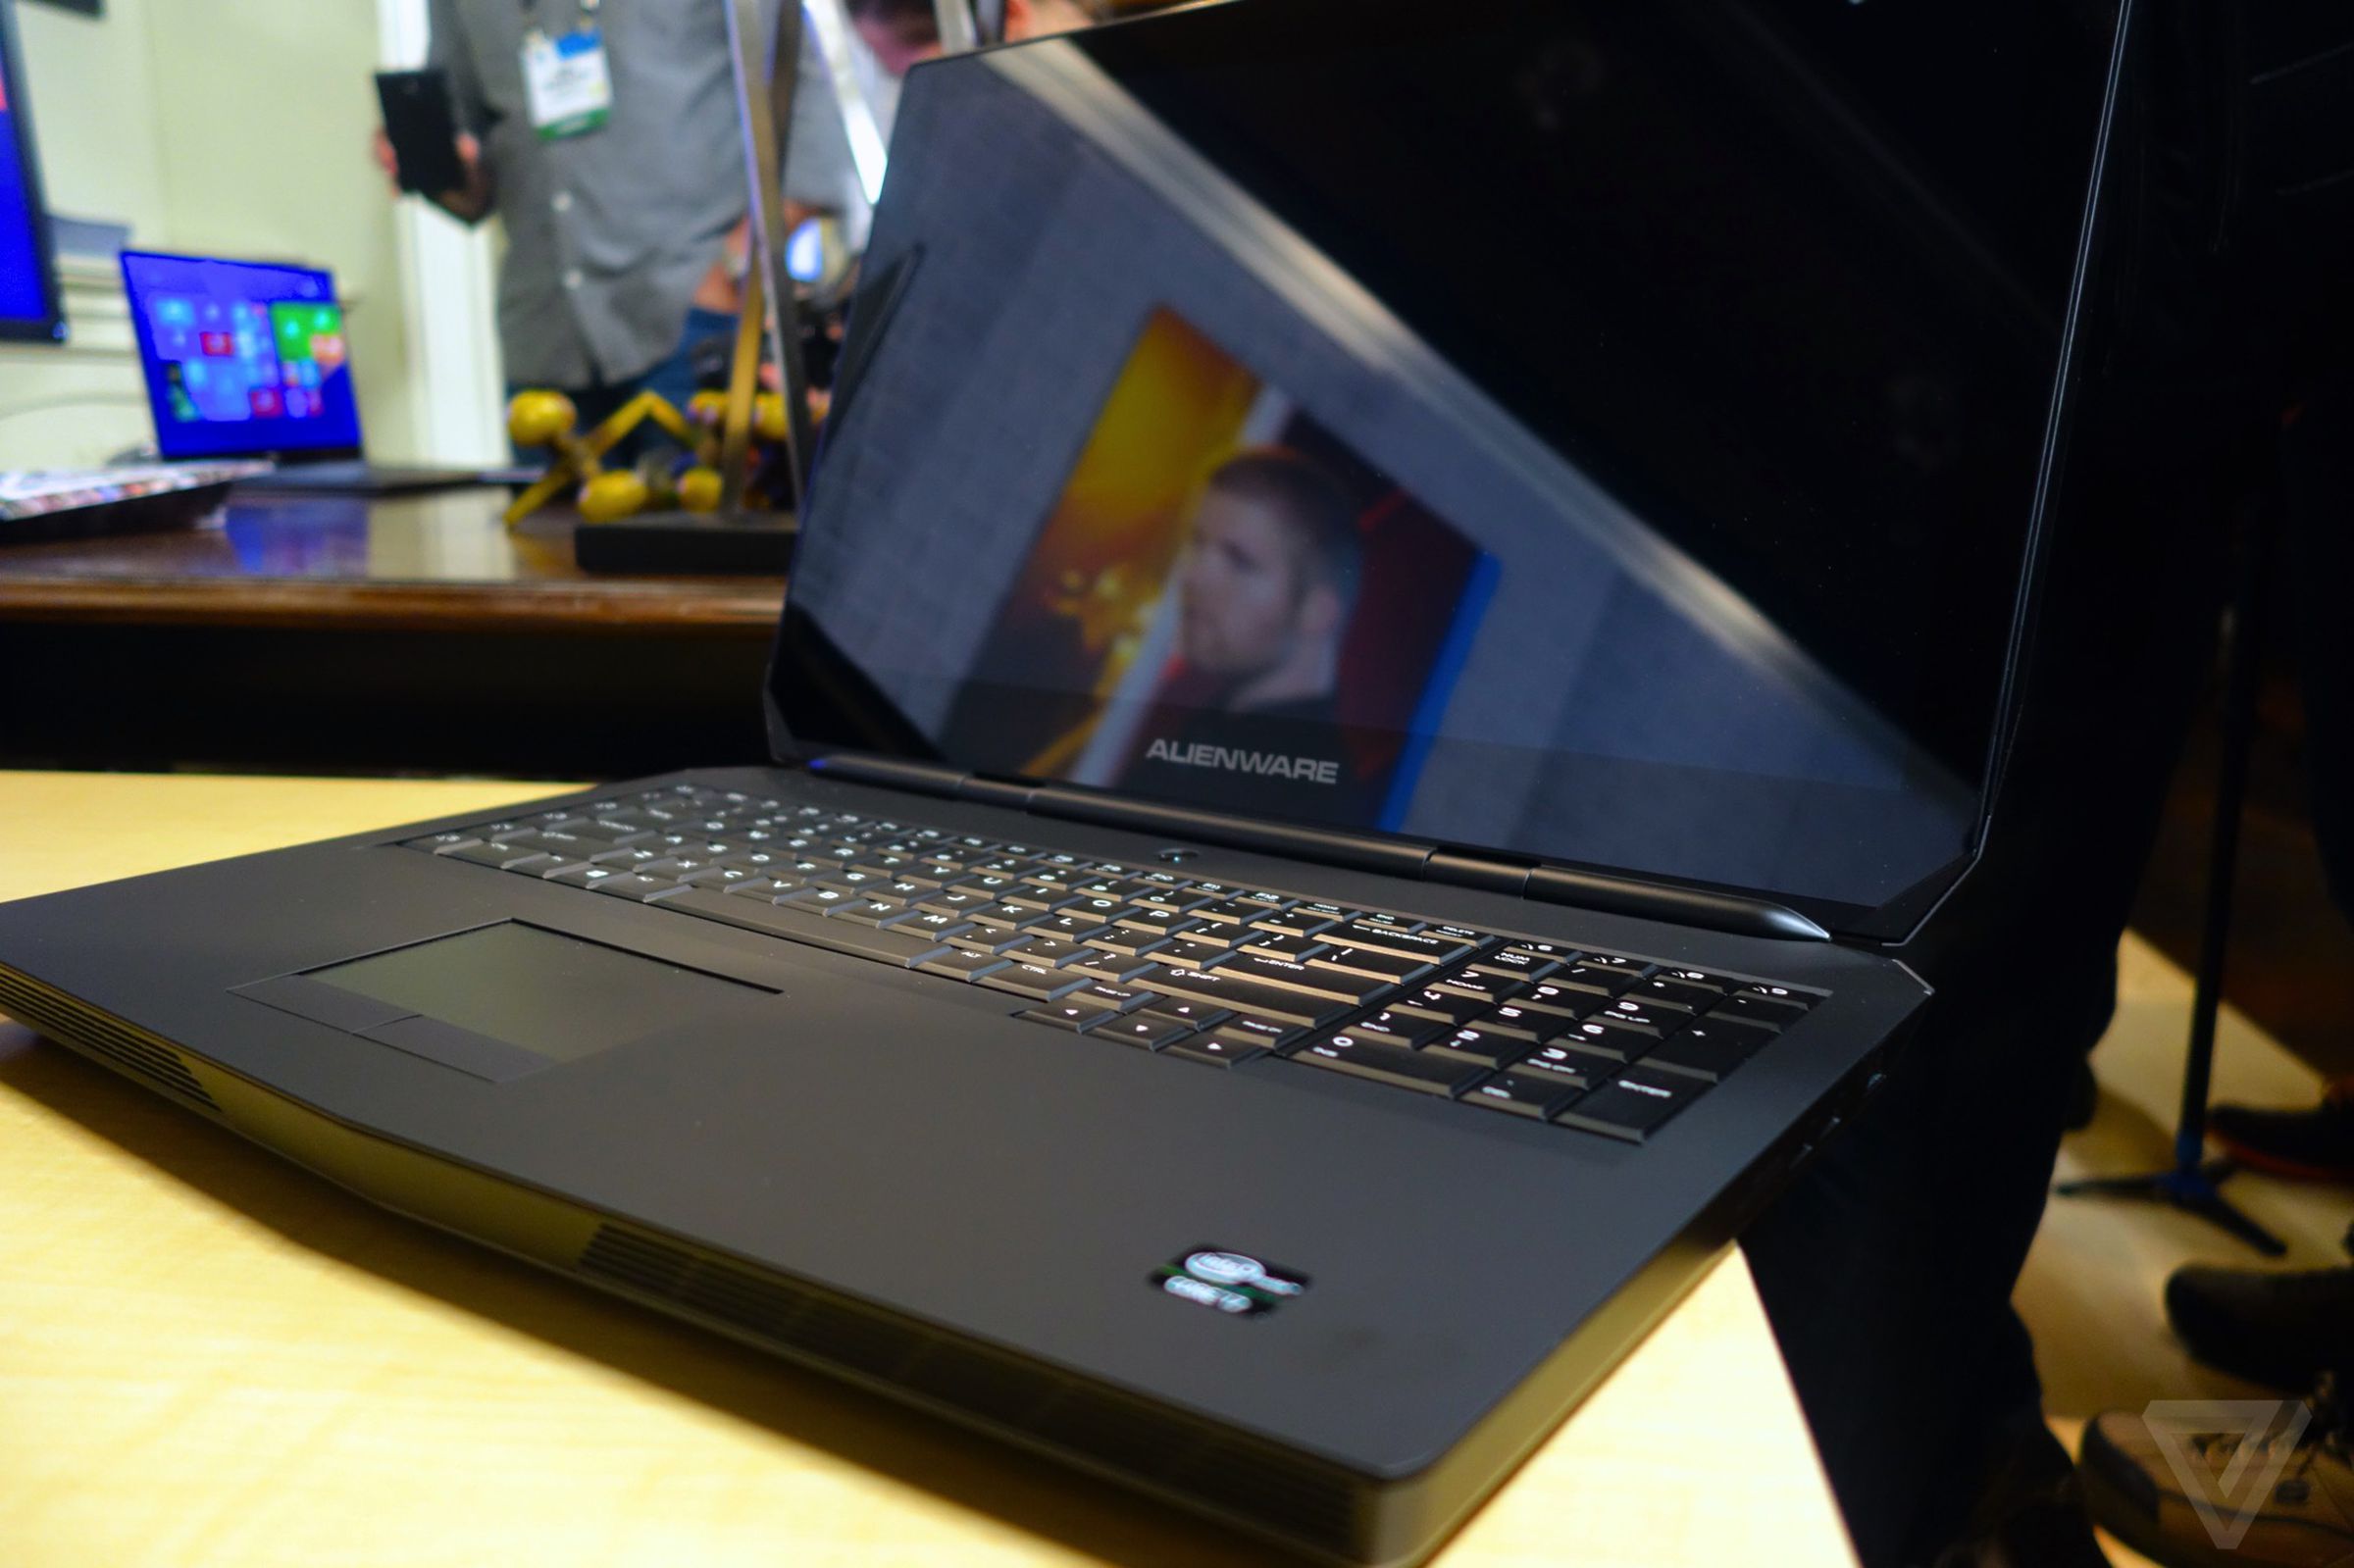 Alienware 15 and 17 in photos